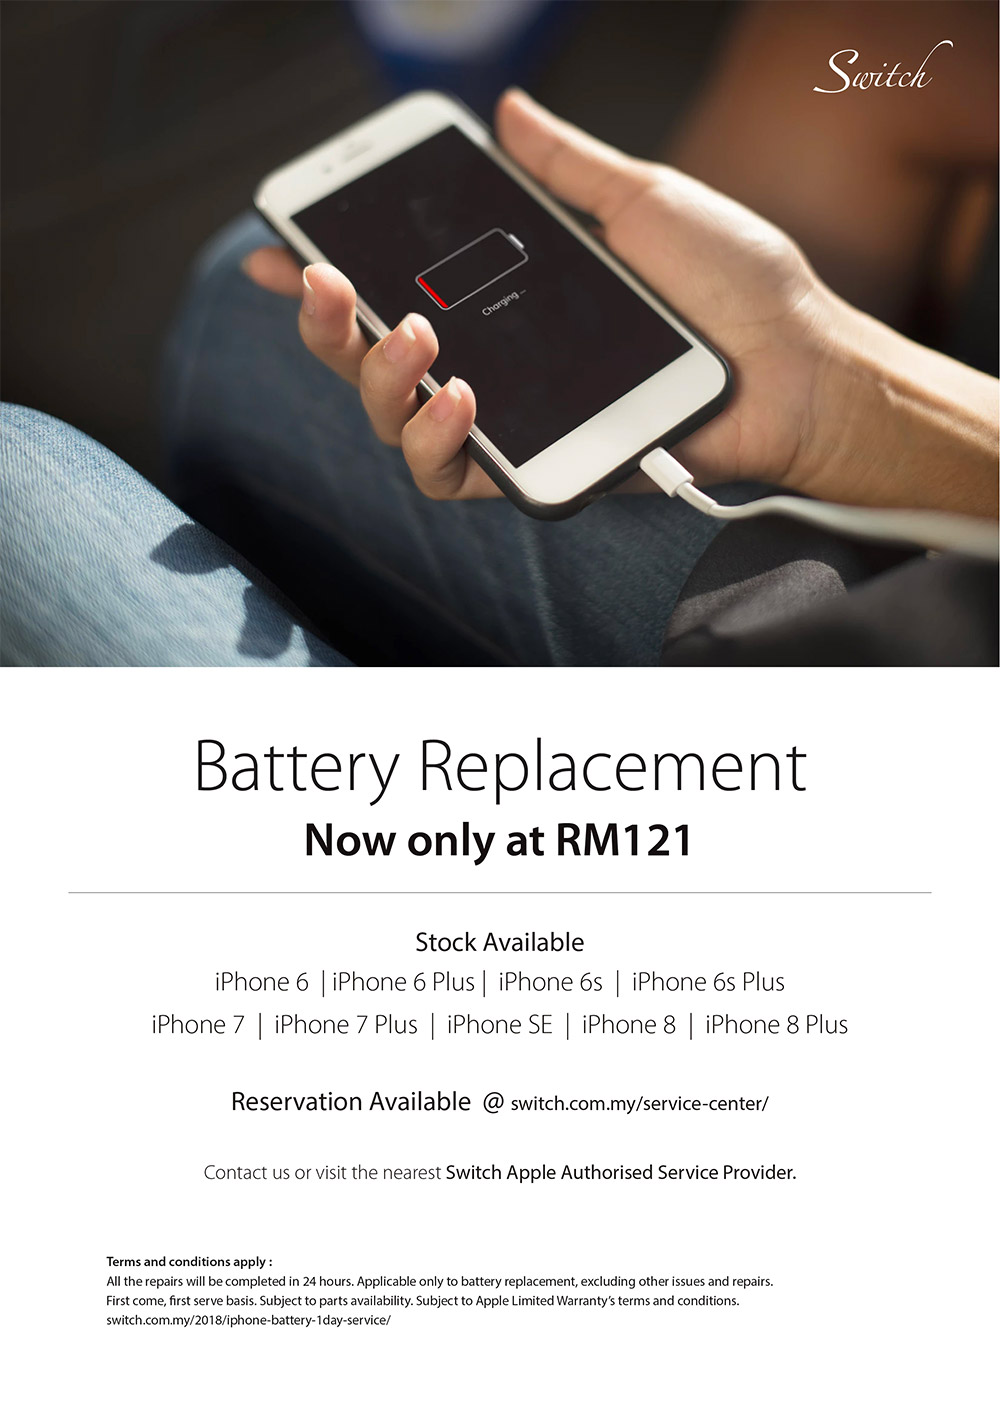 Final Call Discounted Iphone Battery Replacement Offer Ends On 31 December 2018 Soyacincau